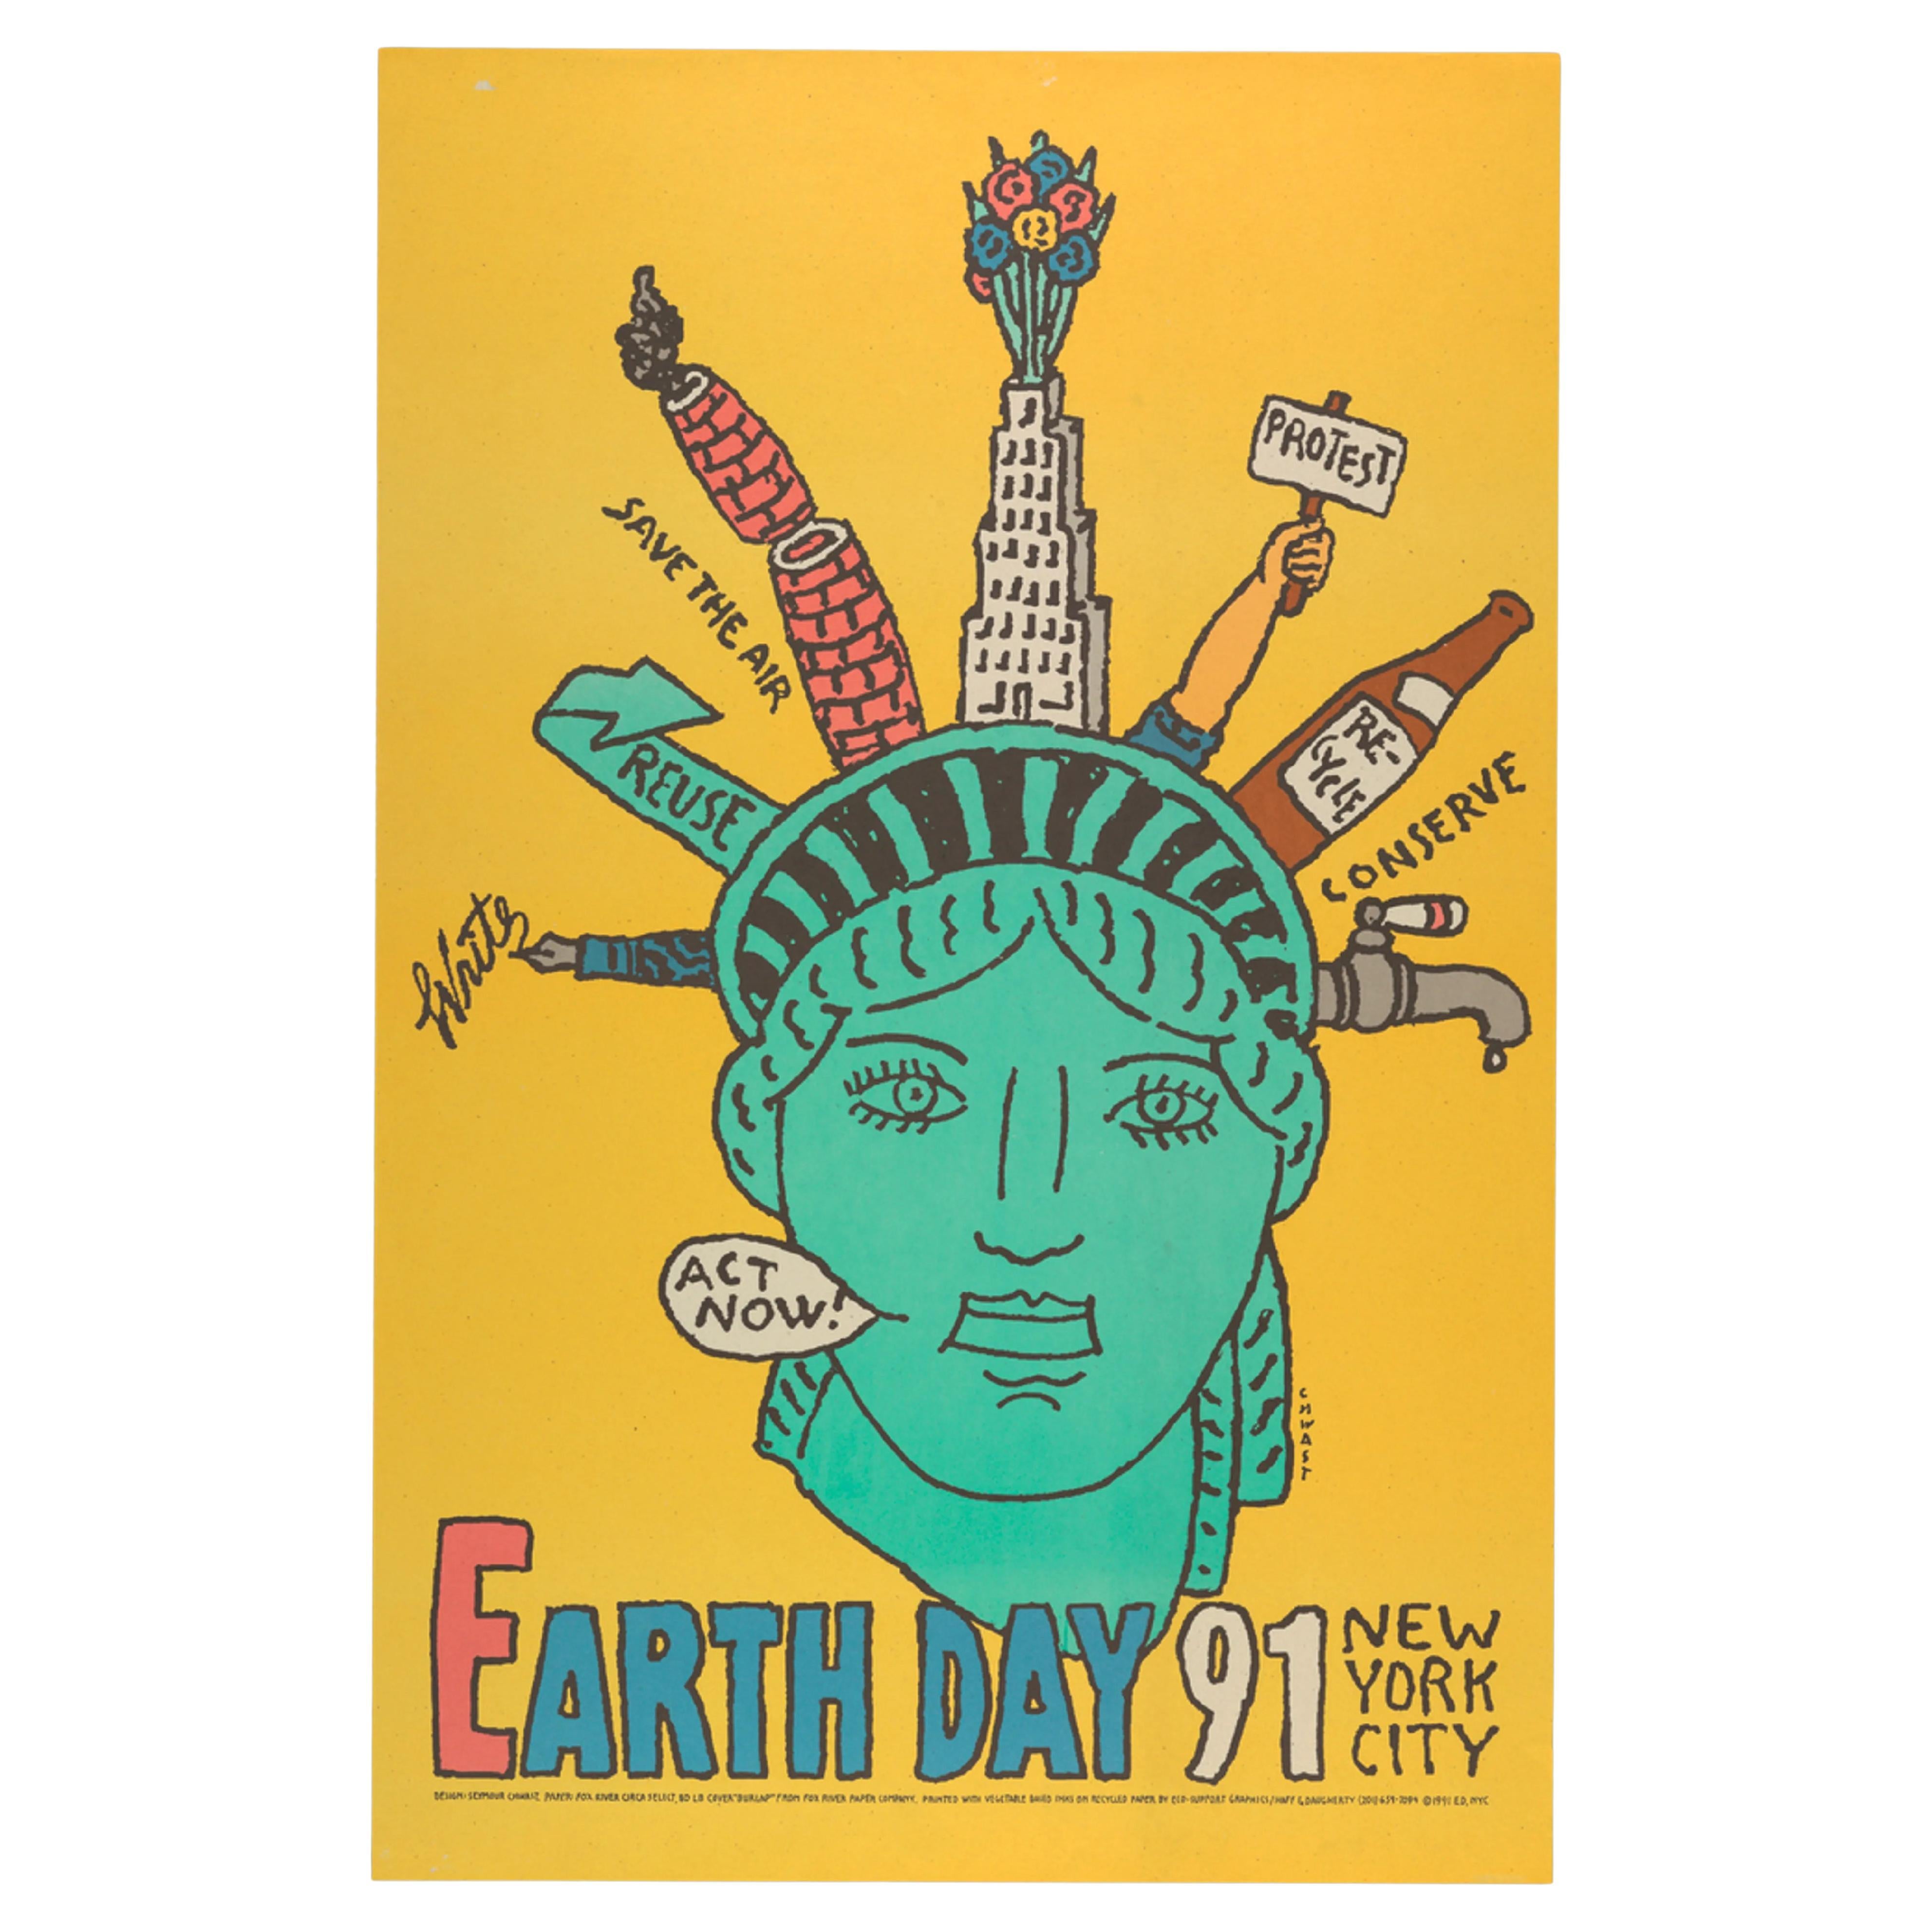 Earth Day 1991 New York City - Vintage Pop Art Poster by Seymour Chwast For Sale